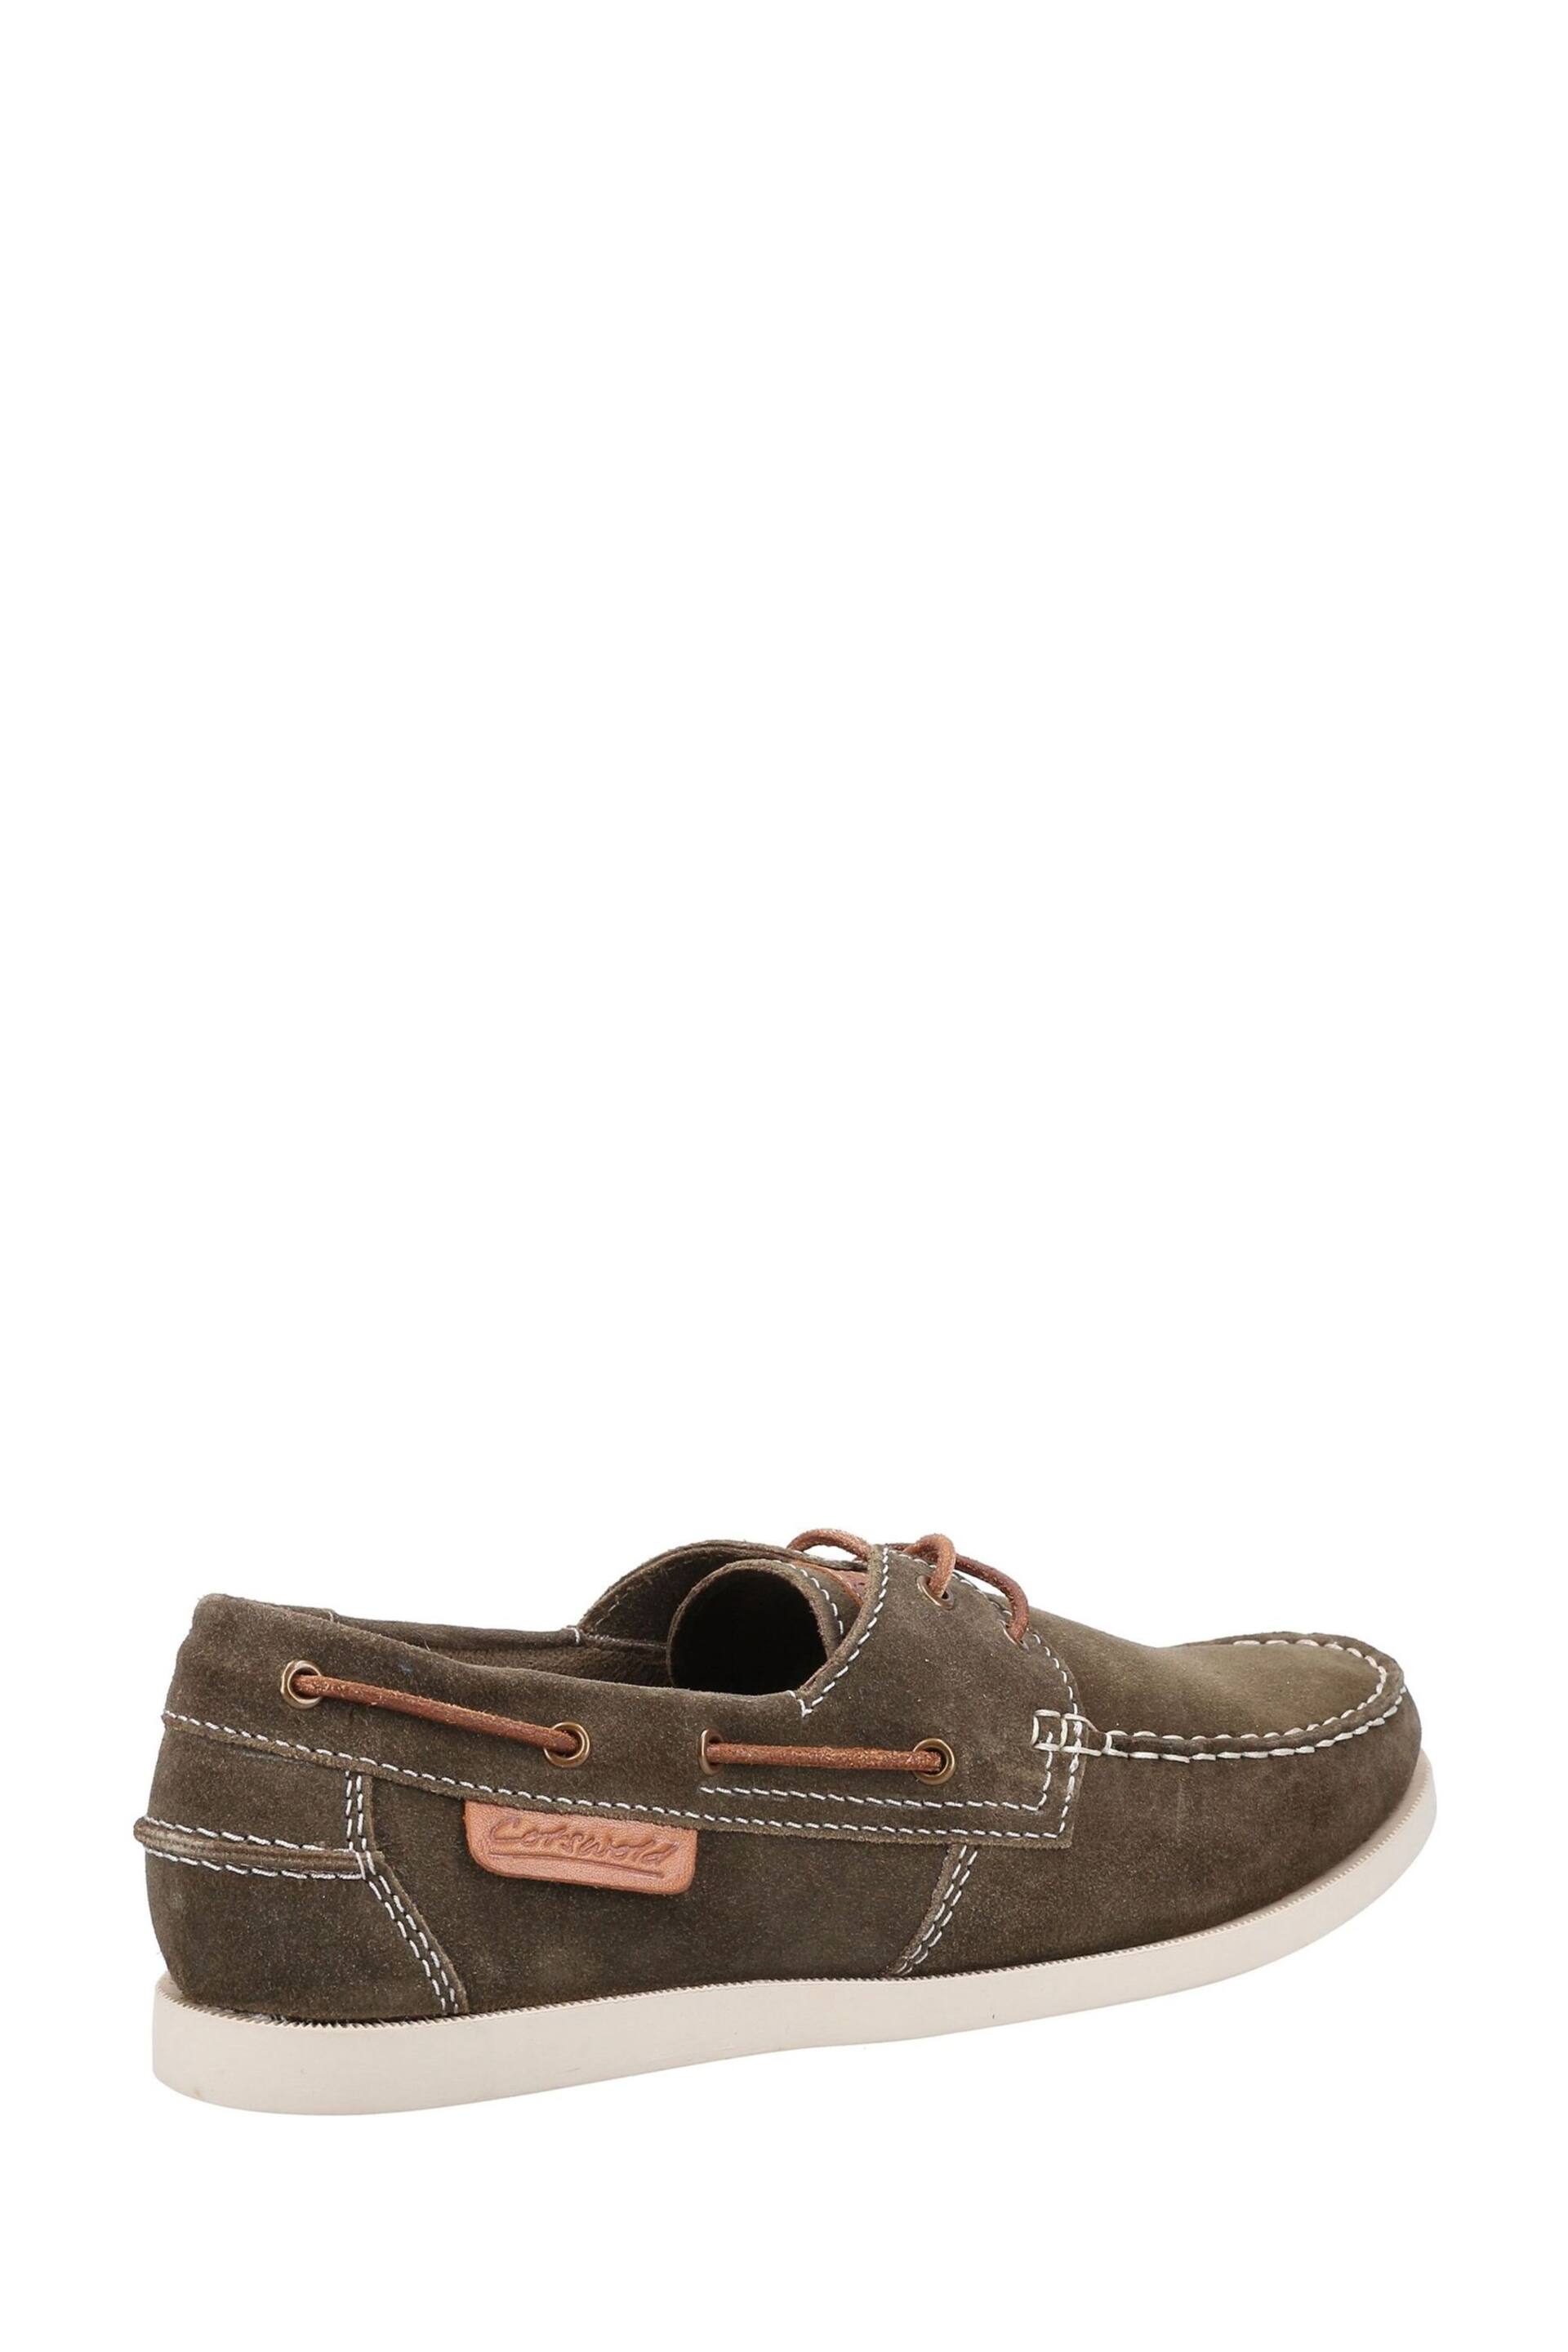 Cotswold	Green Mitcheldean Boat Shoes - Image 3 of 4